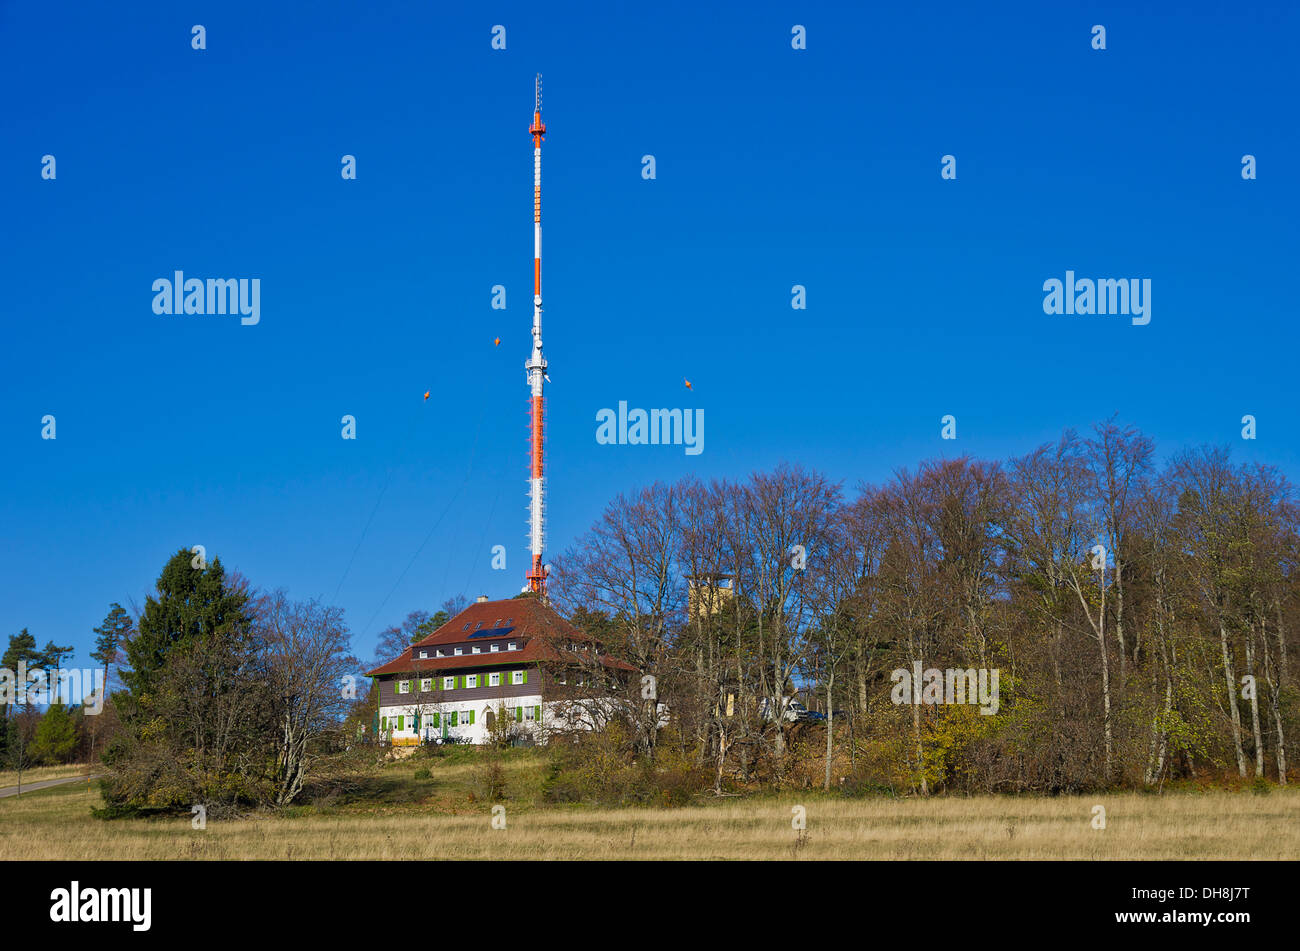 The Nagelehaus House, antenna tower and look-out on Raichberg Mountain, Swabian Alb near Albstadt, Germany. Stock Photo